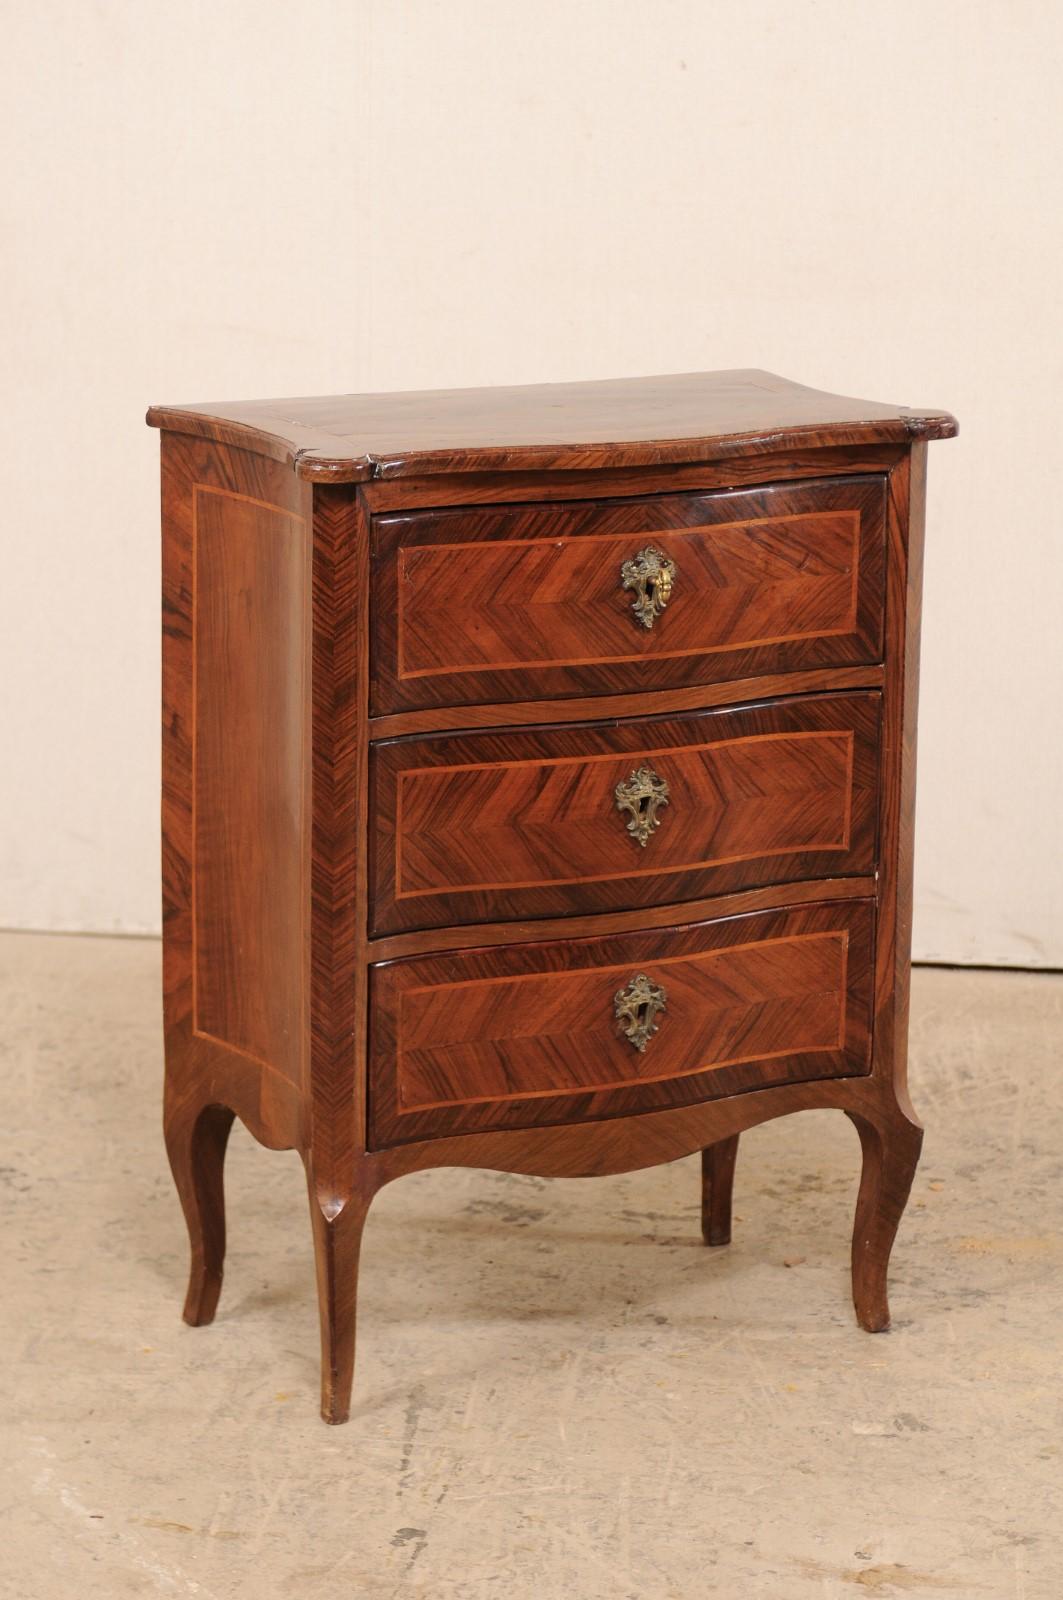 A small-sized Italian side chest of three drawers from the 18th century. This antique commode from Italy features beautiful banding and inlay details within a shapely body with subtly bowed front and concave sides. The top has a simple yet elegant